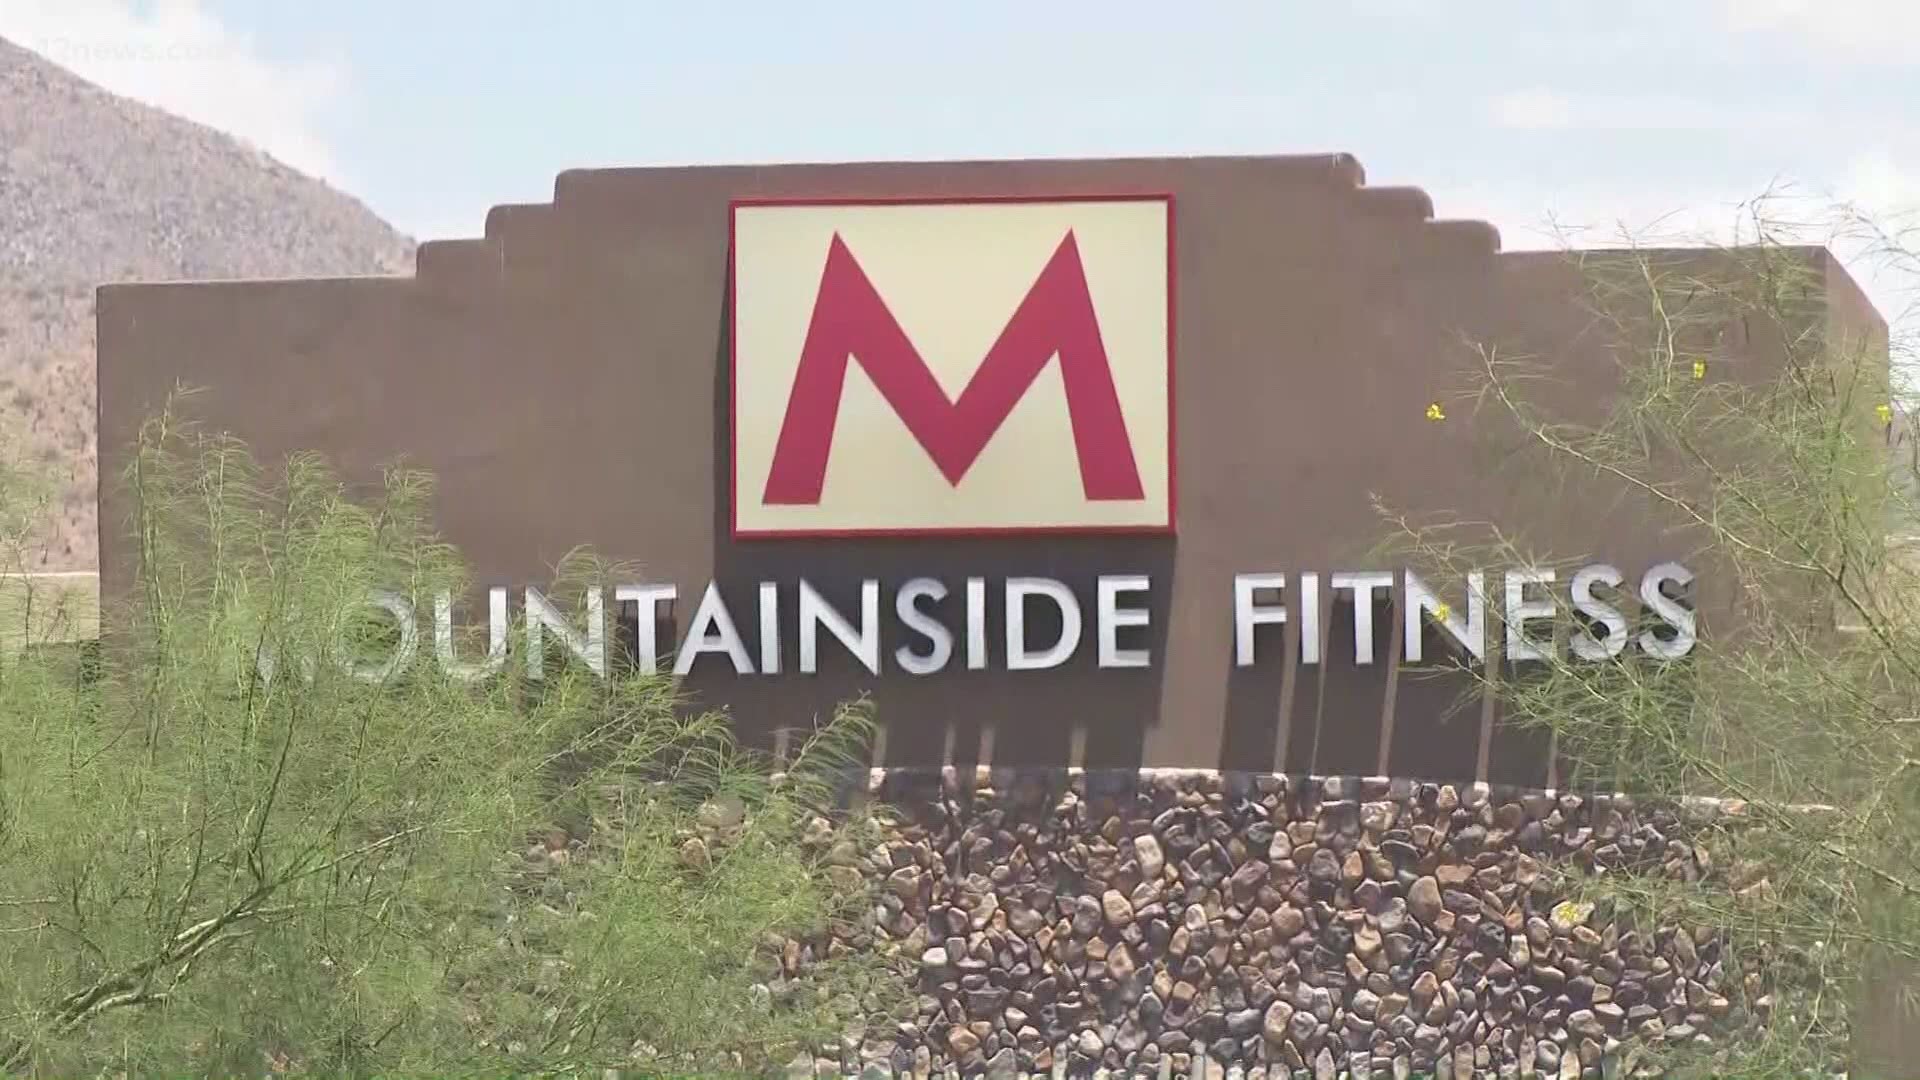 Mountainside’s Twitter account said the gyms plan to reopen on August 11, but there’s still a process to reopening that includes a state application.